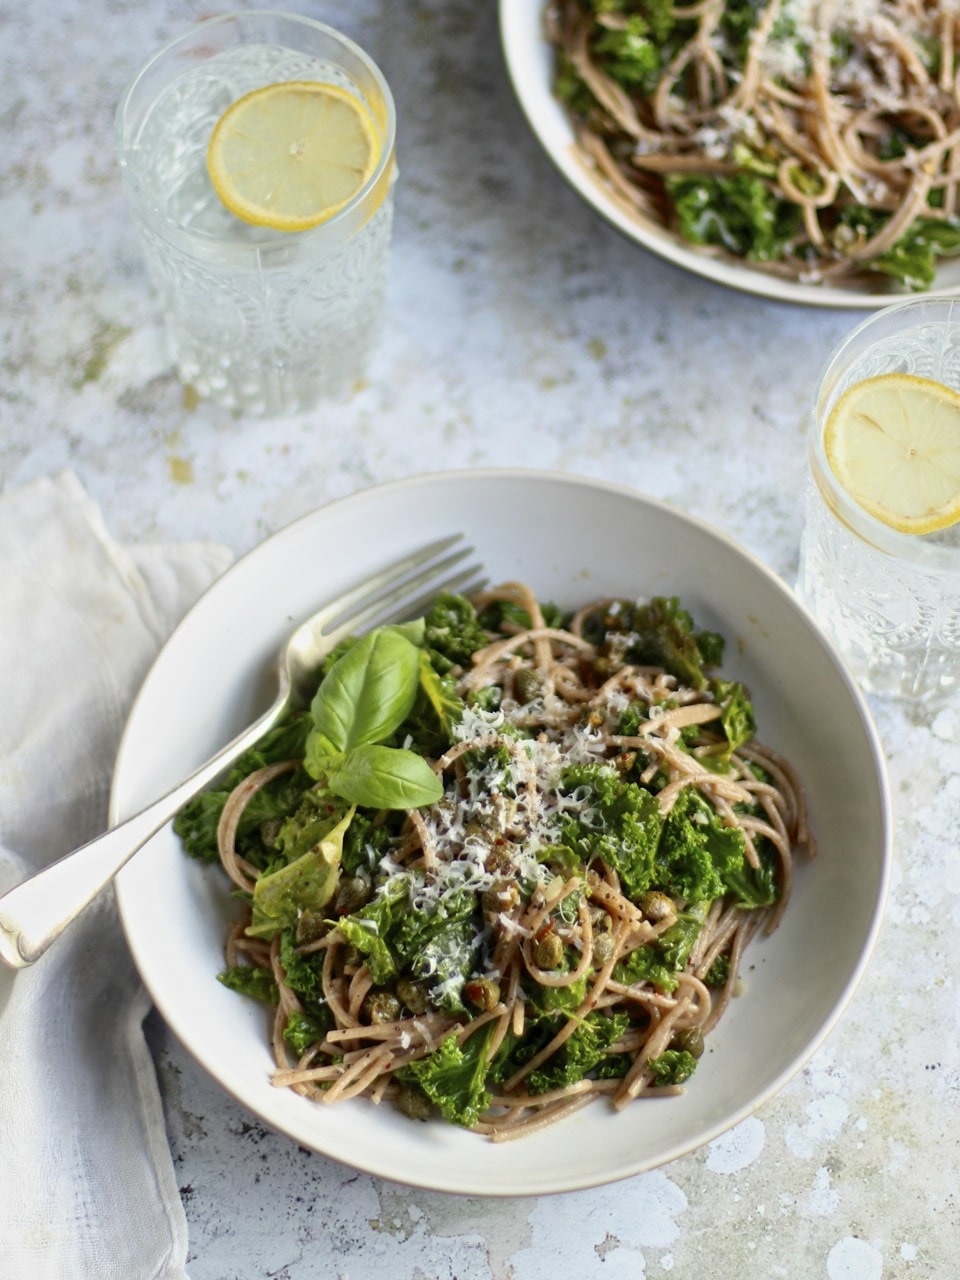 Garlicky Kale Spelt Spaghetti with Chilli Crispy Capers, a vegetarian healthy spaghetti supper dish by Natural Kitchen Adventures